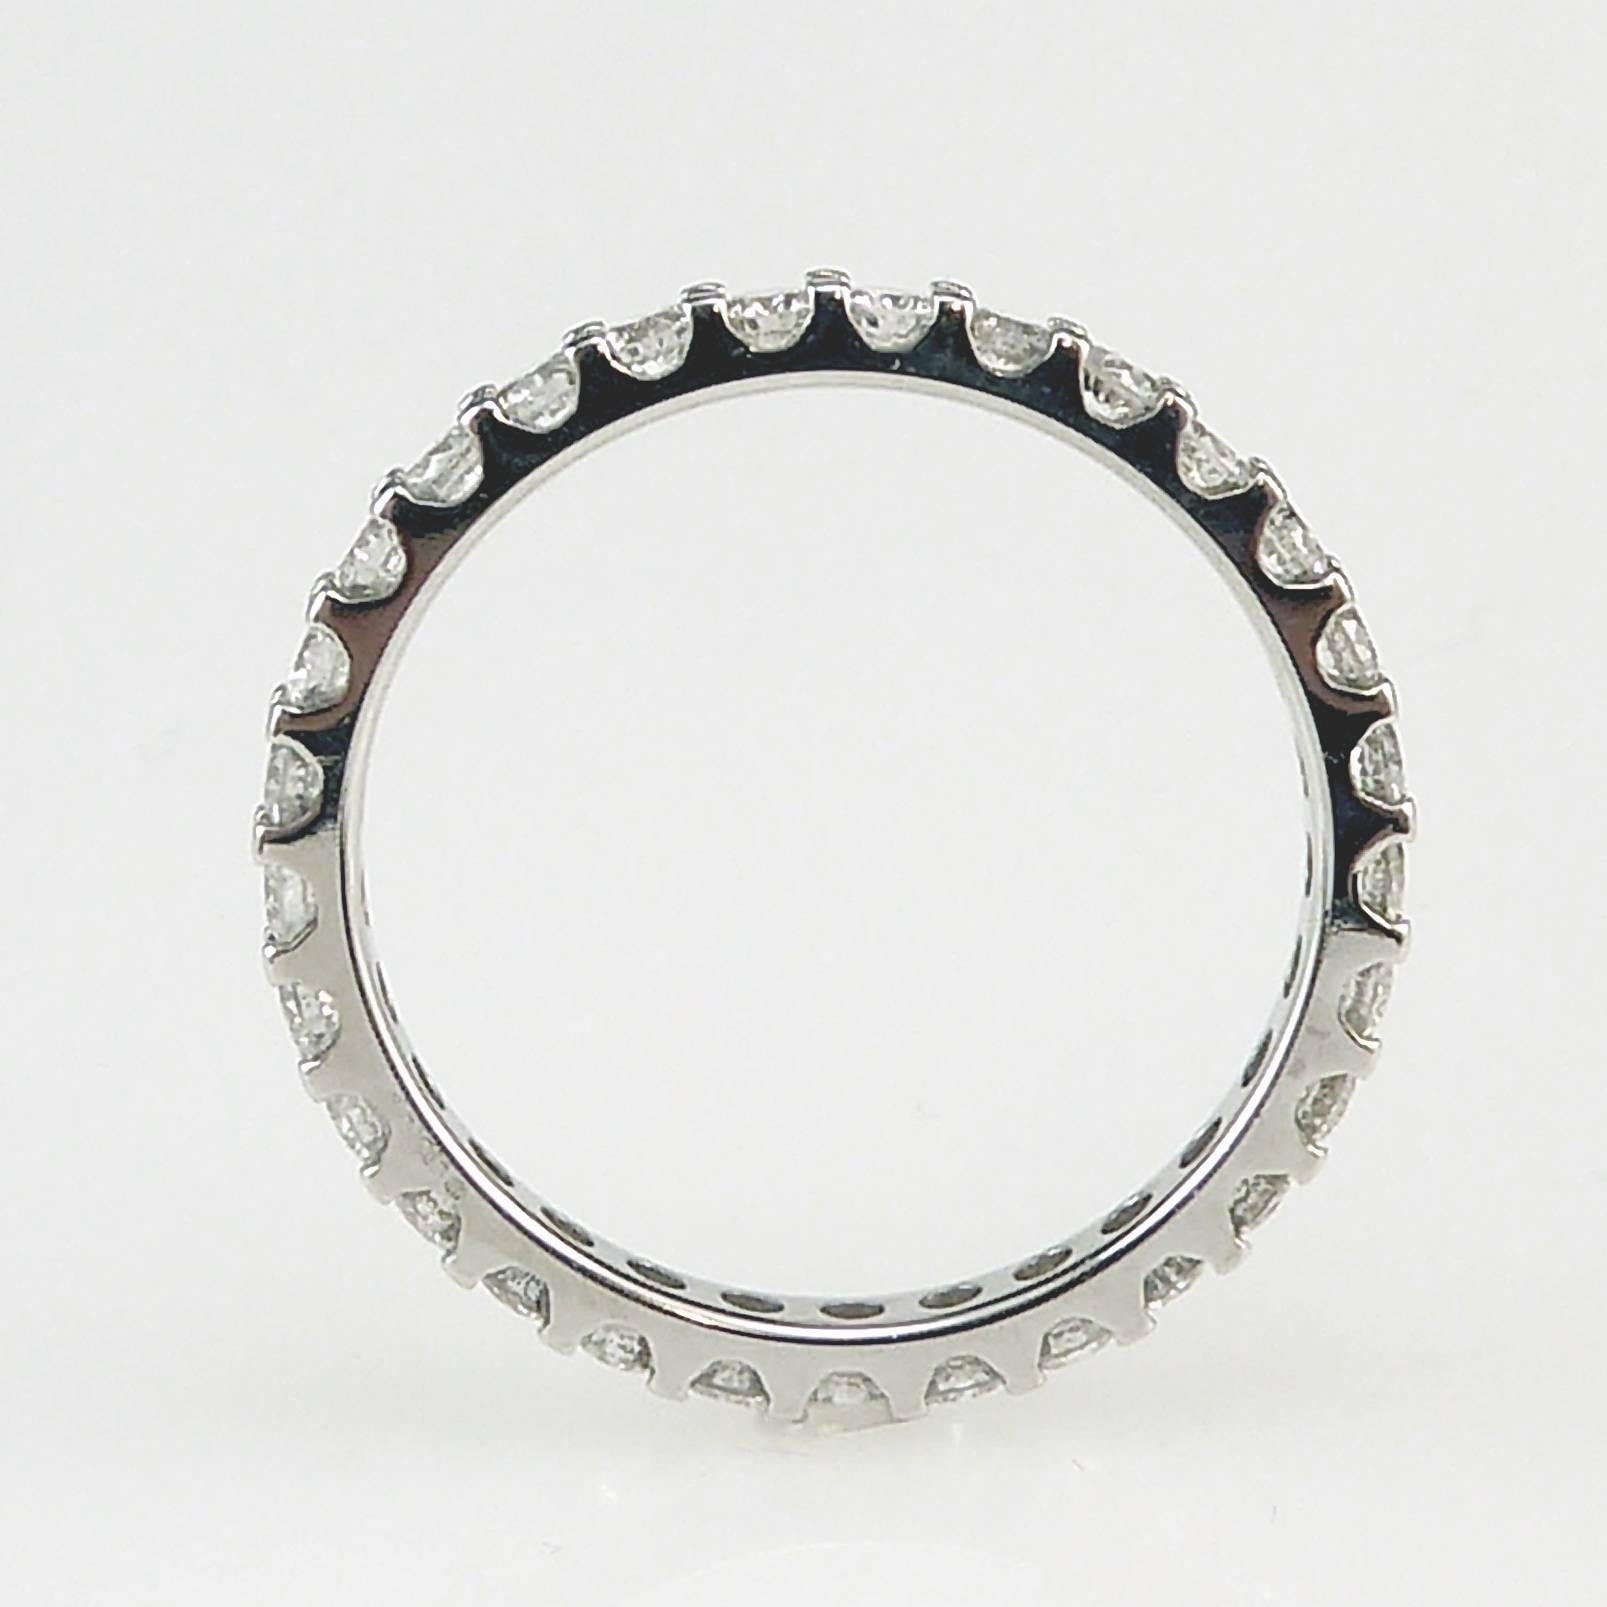 Contemporary 1.0 Carat Diamond Eternity Ring in White, Pre-Owned